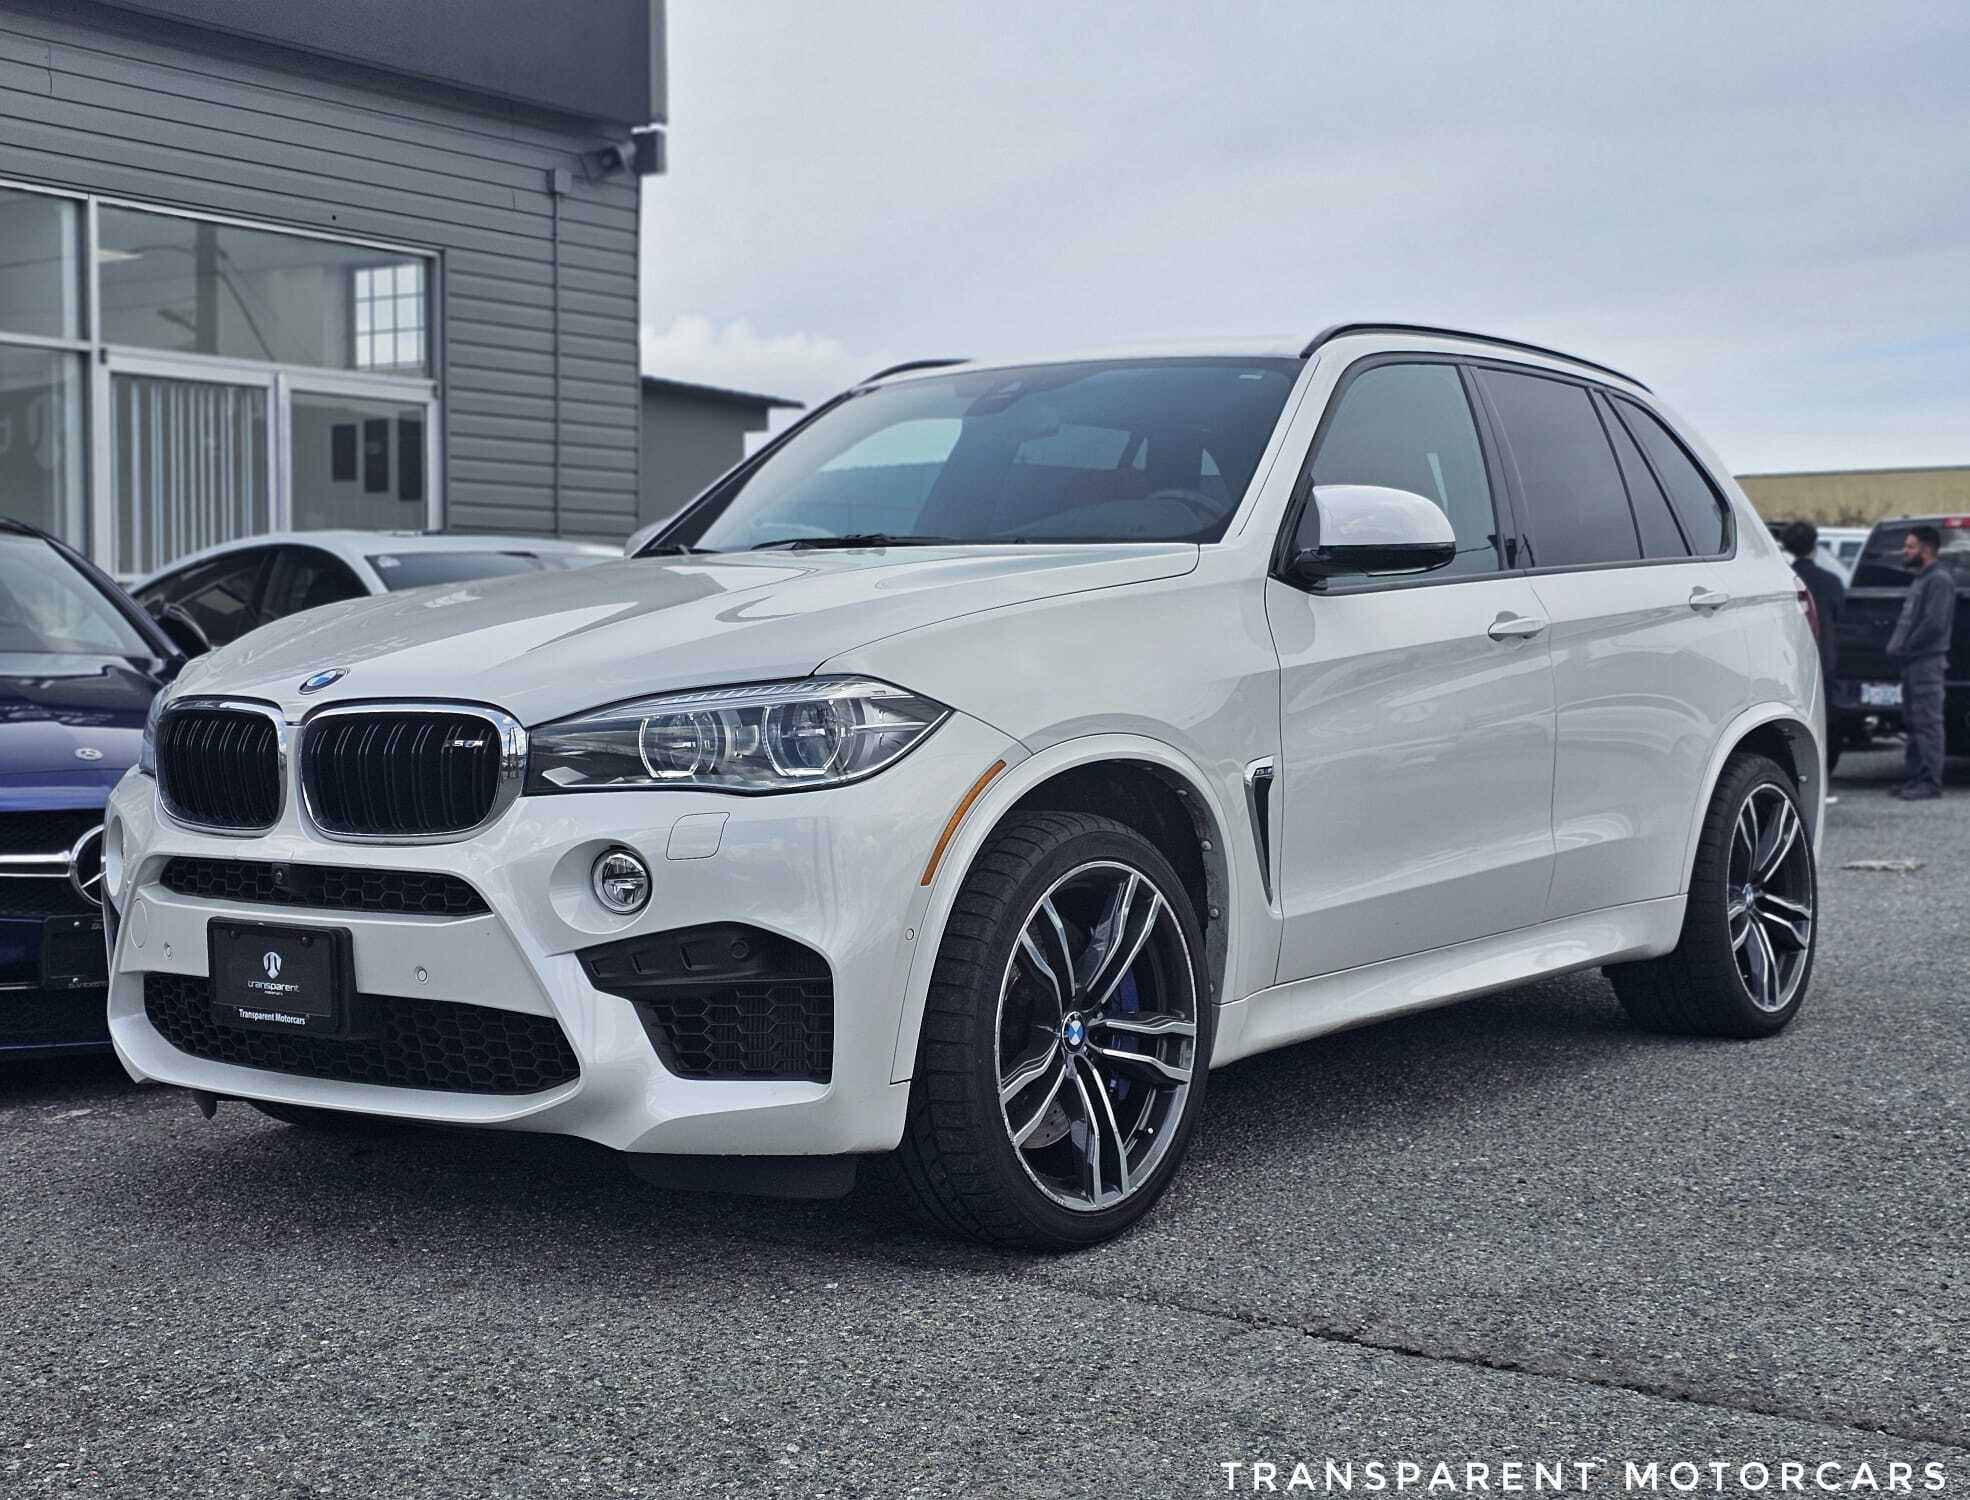 2016 BMW X5 M 567HP Twin-Turbo/21inch Wheels/2 Sets of Tires/Sur